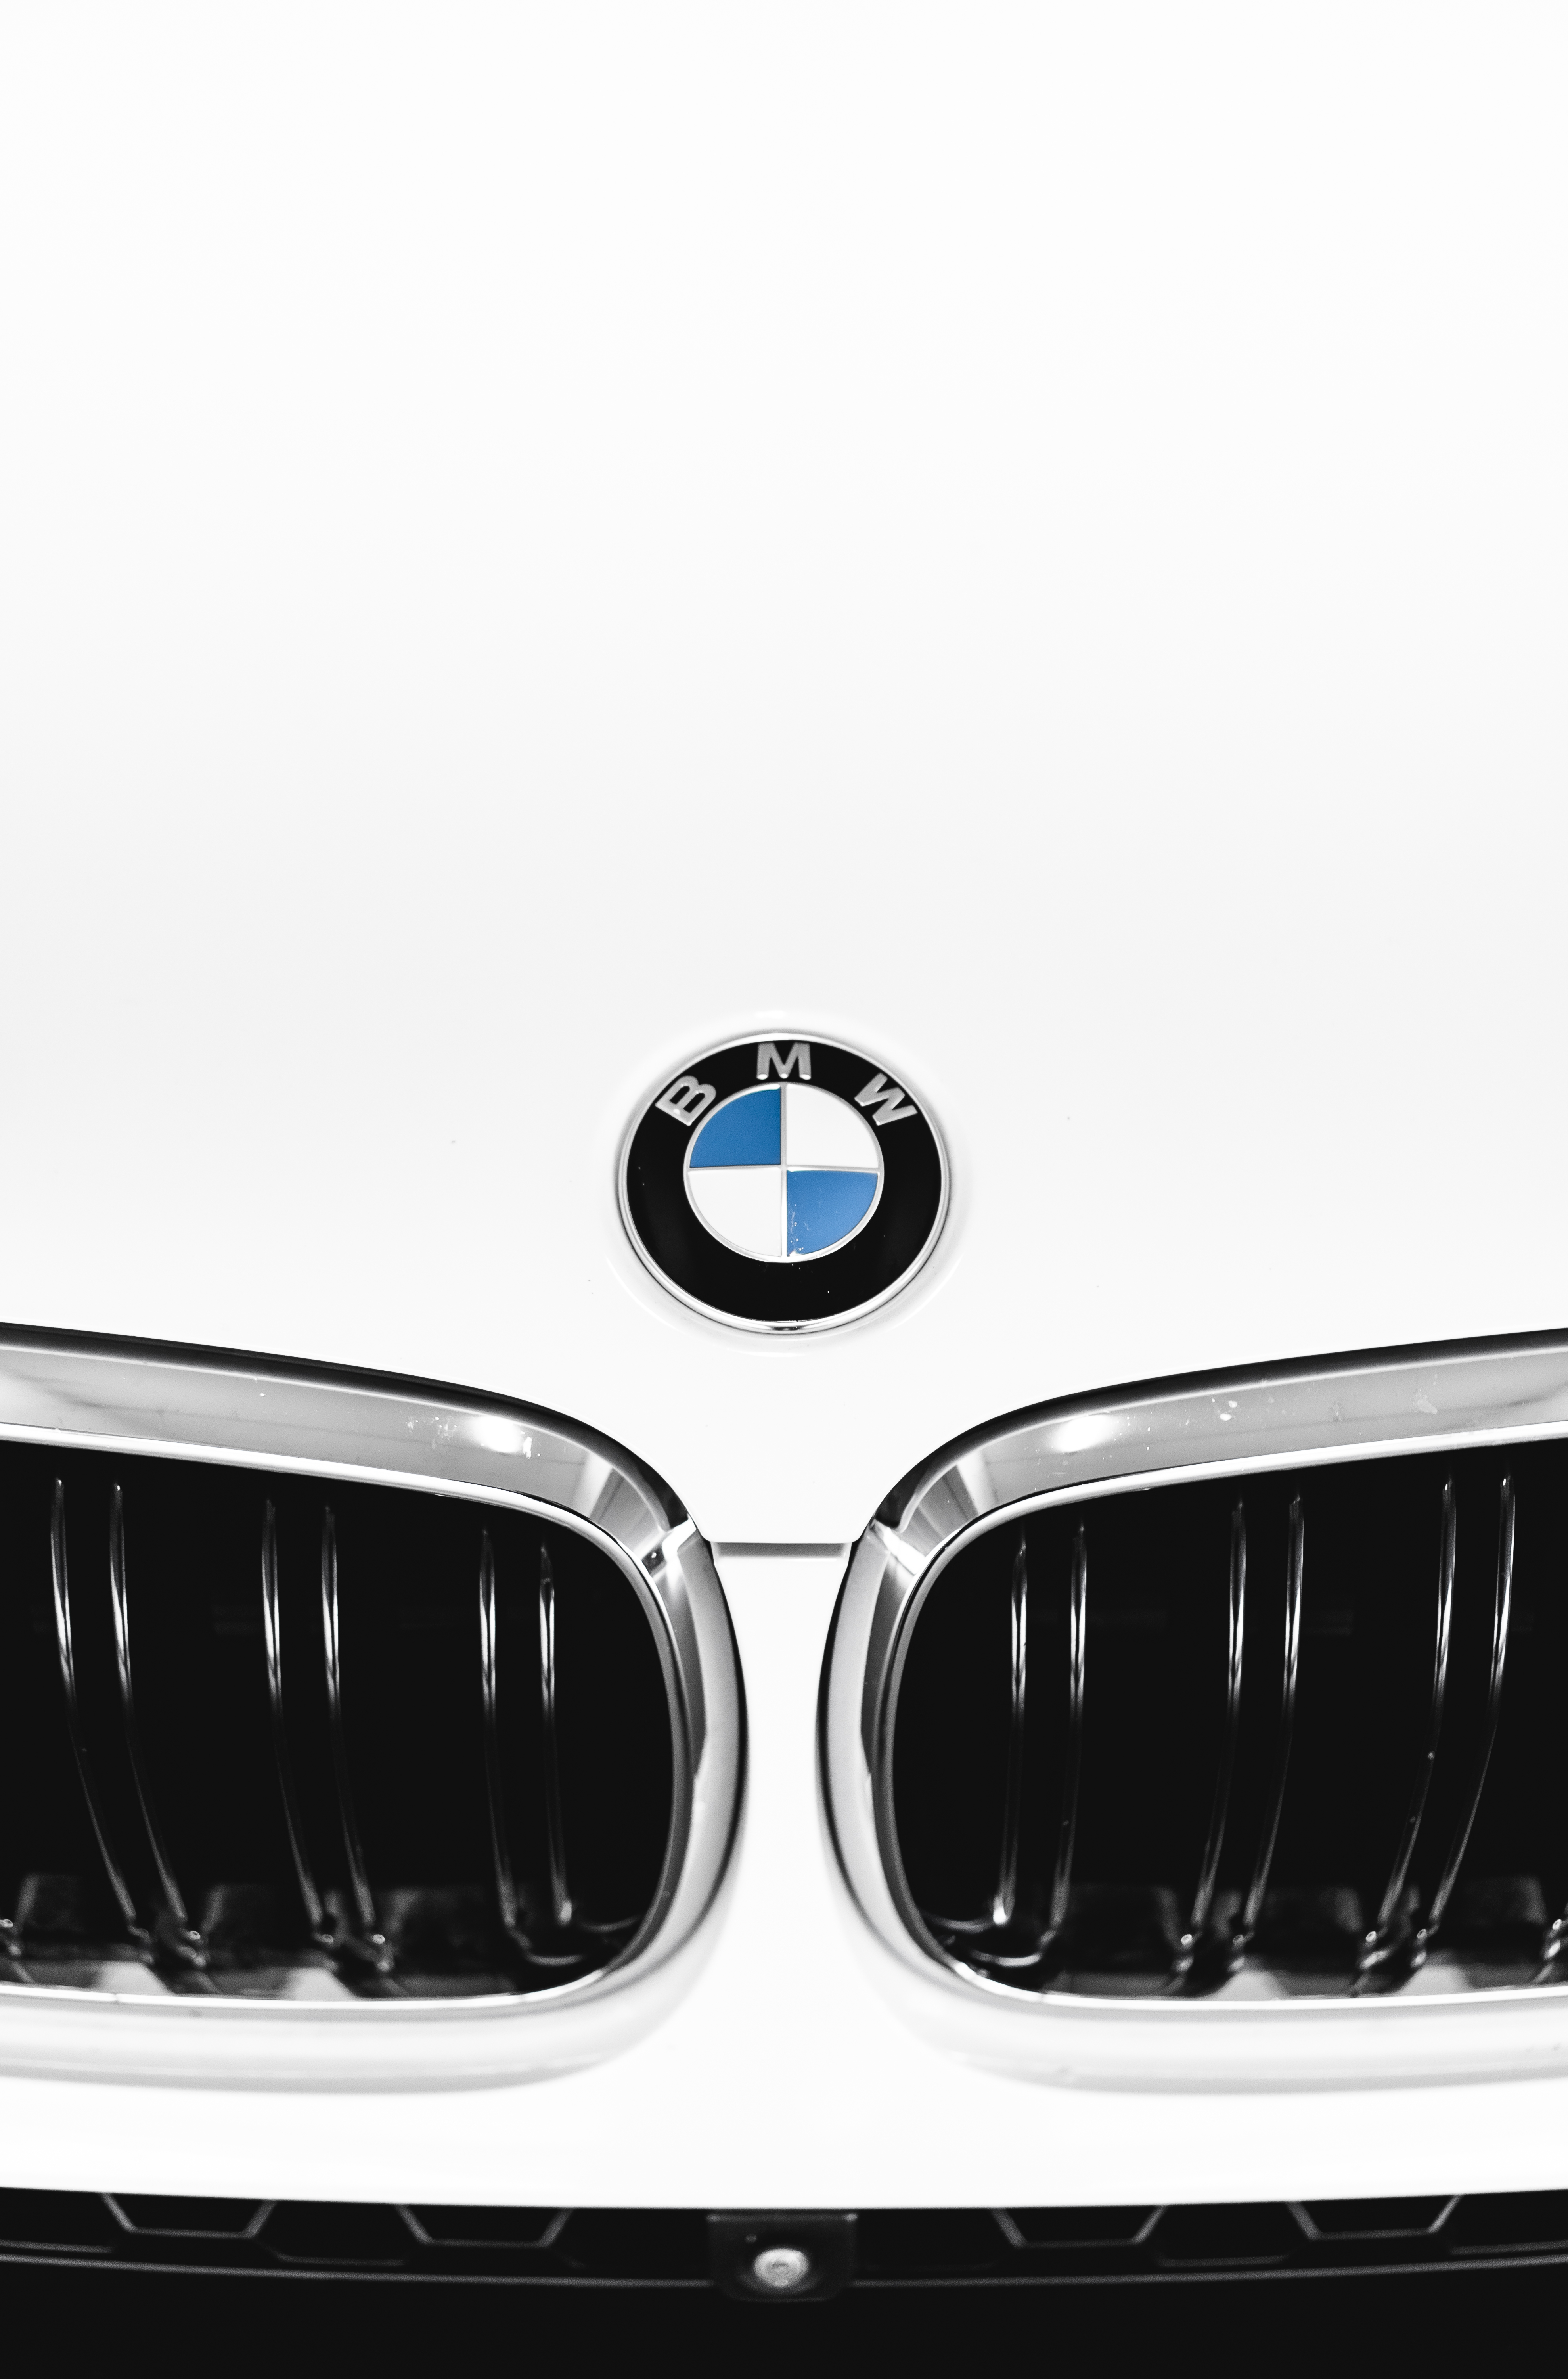 BMW Logo on the Hood of a Car · Free Stock Photo